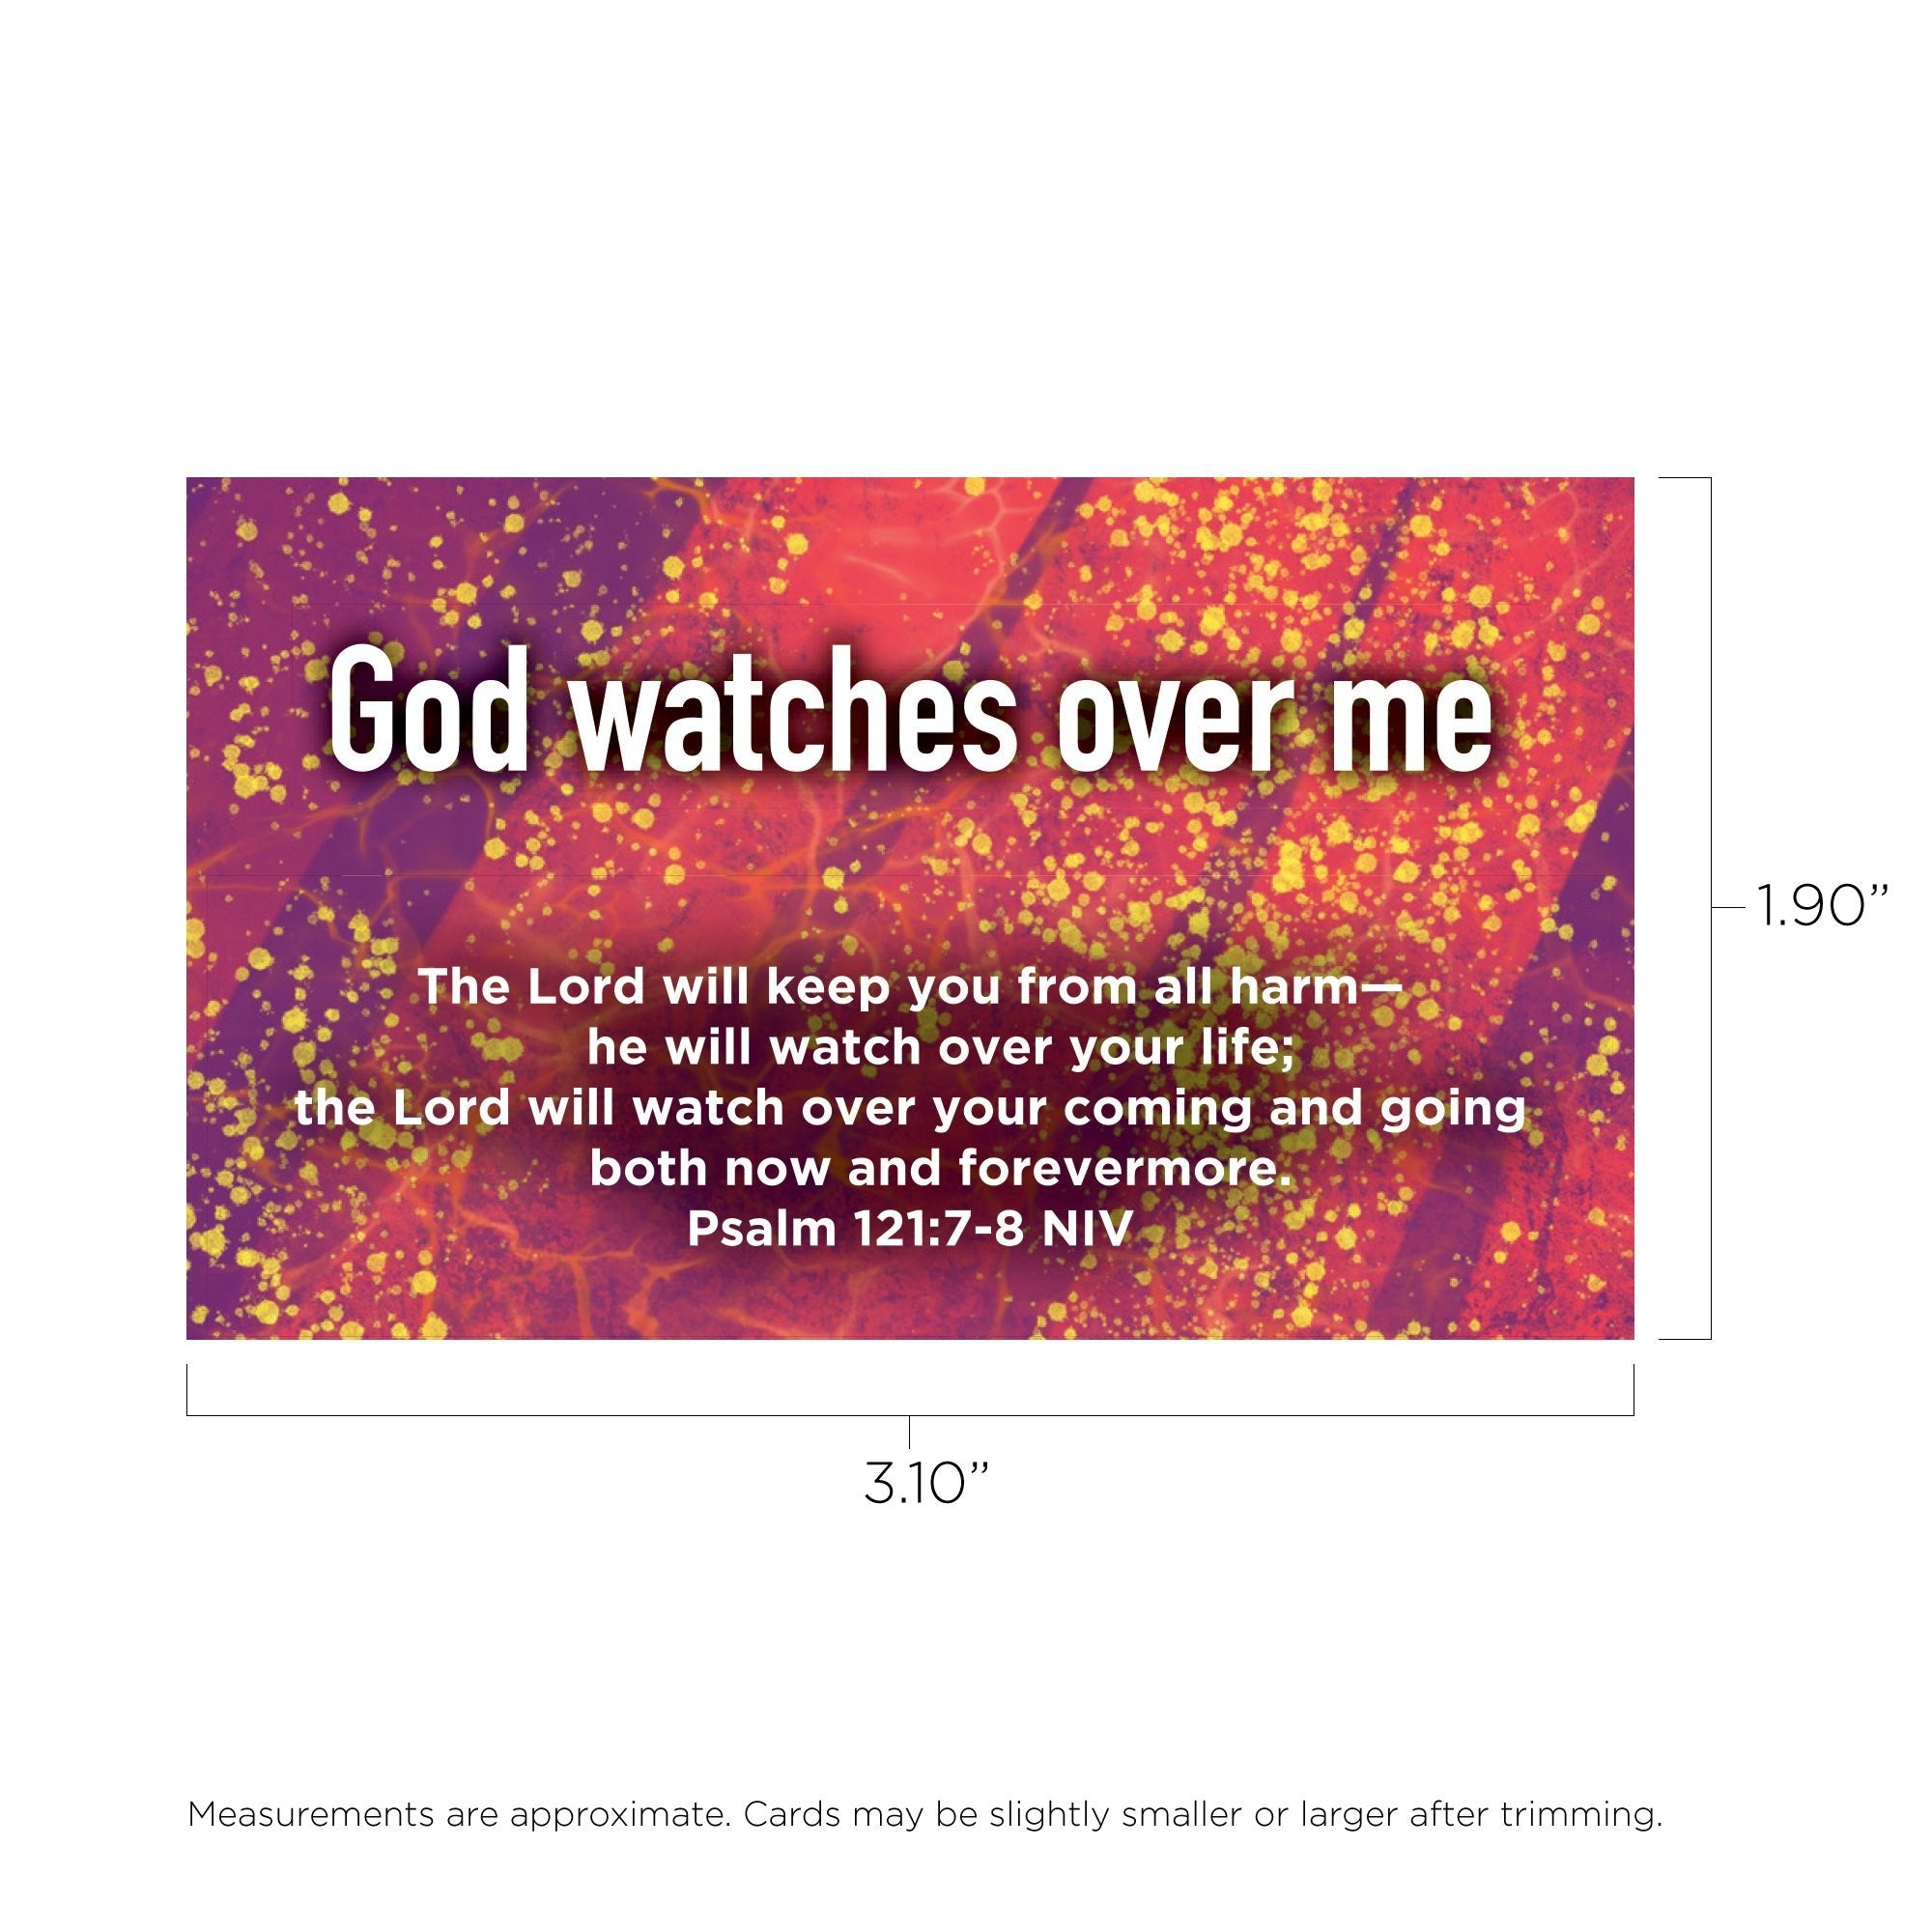 Children and Youth, Pass Along Scripture Cards, God Watches Over Me, Psalm 121:7-8, Pack of 25